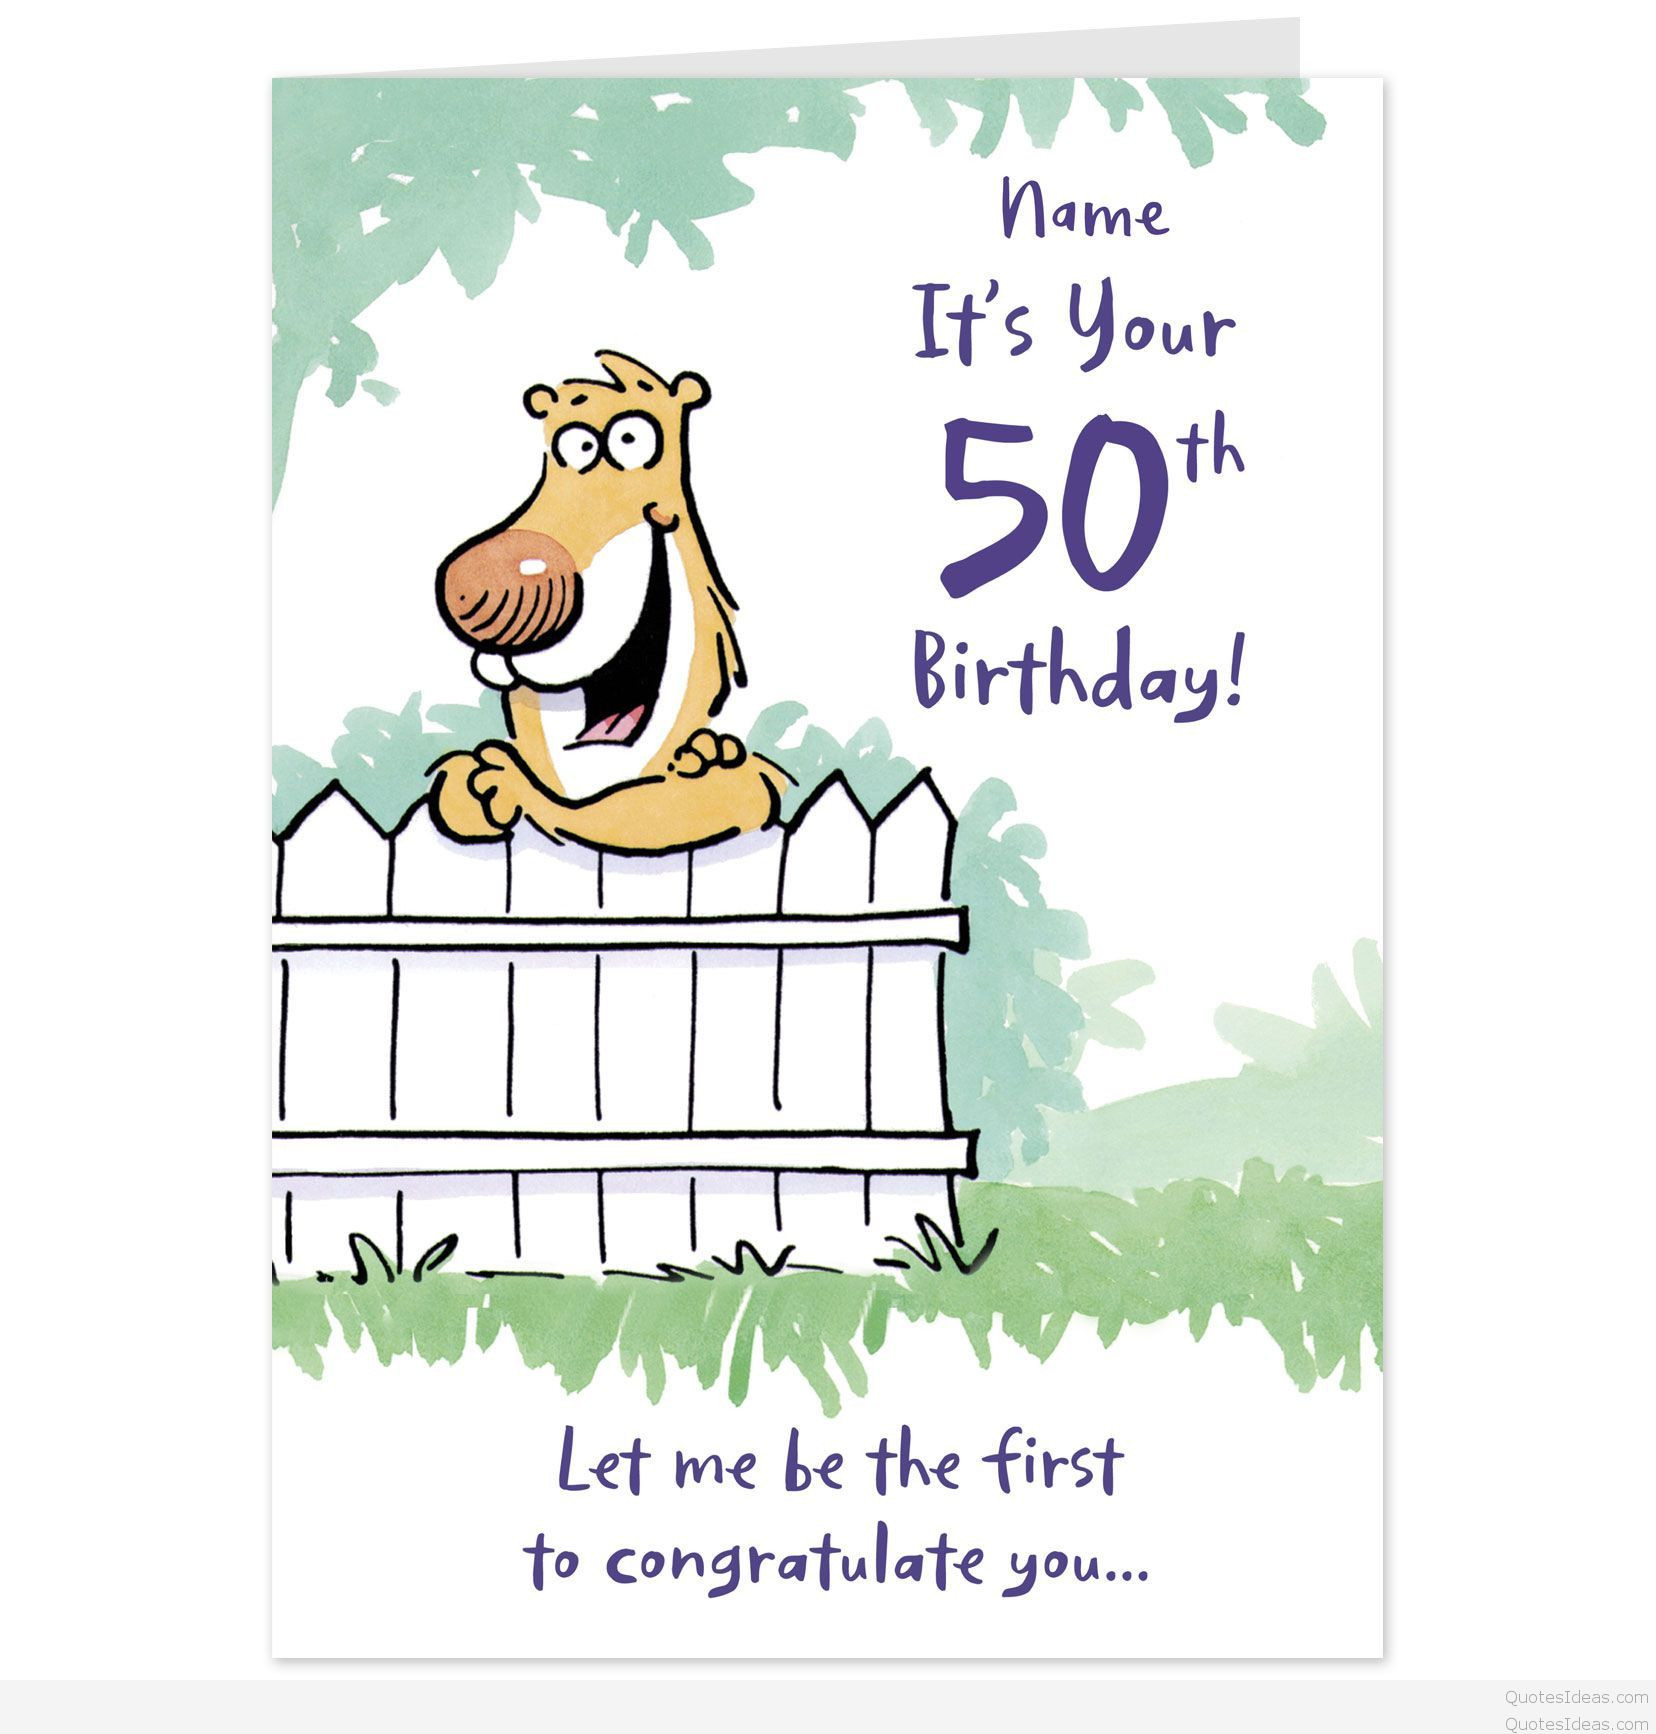 Birthday Cards For Friends Funny
 Latest funny cards quotes and sayings